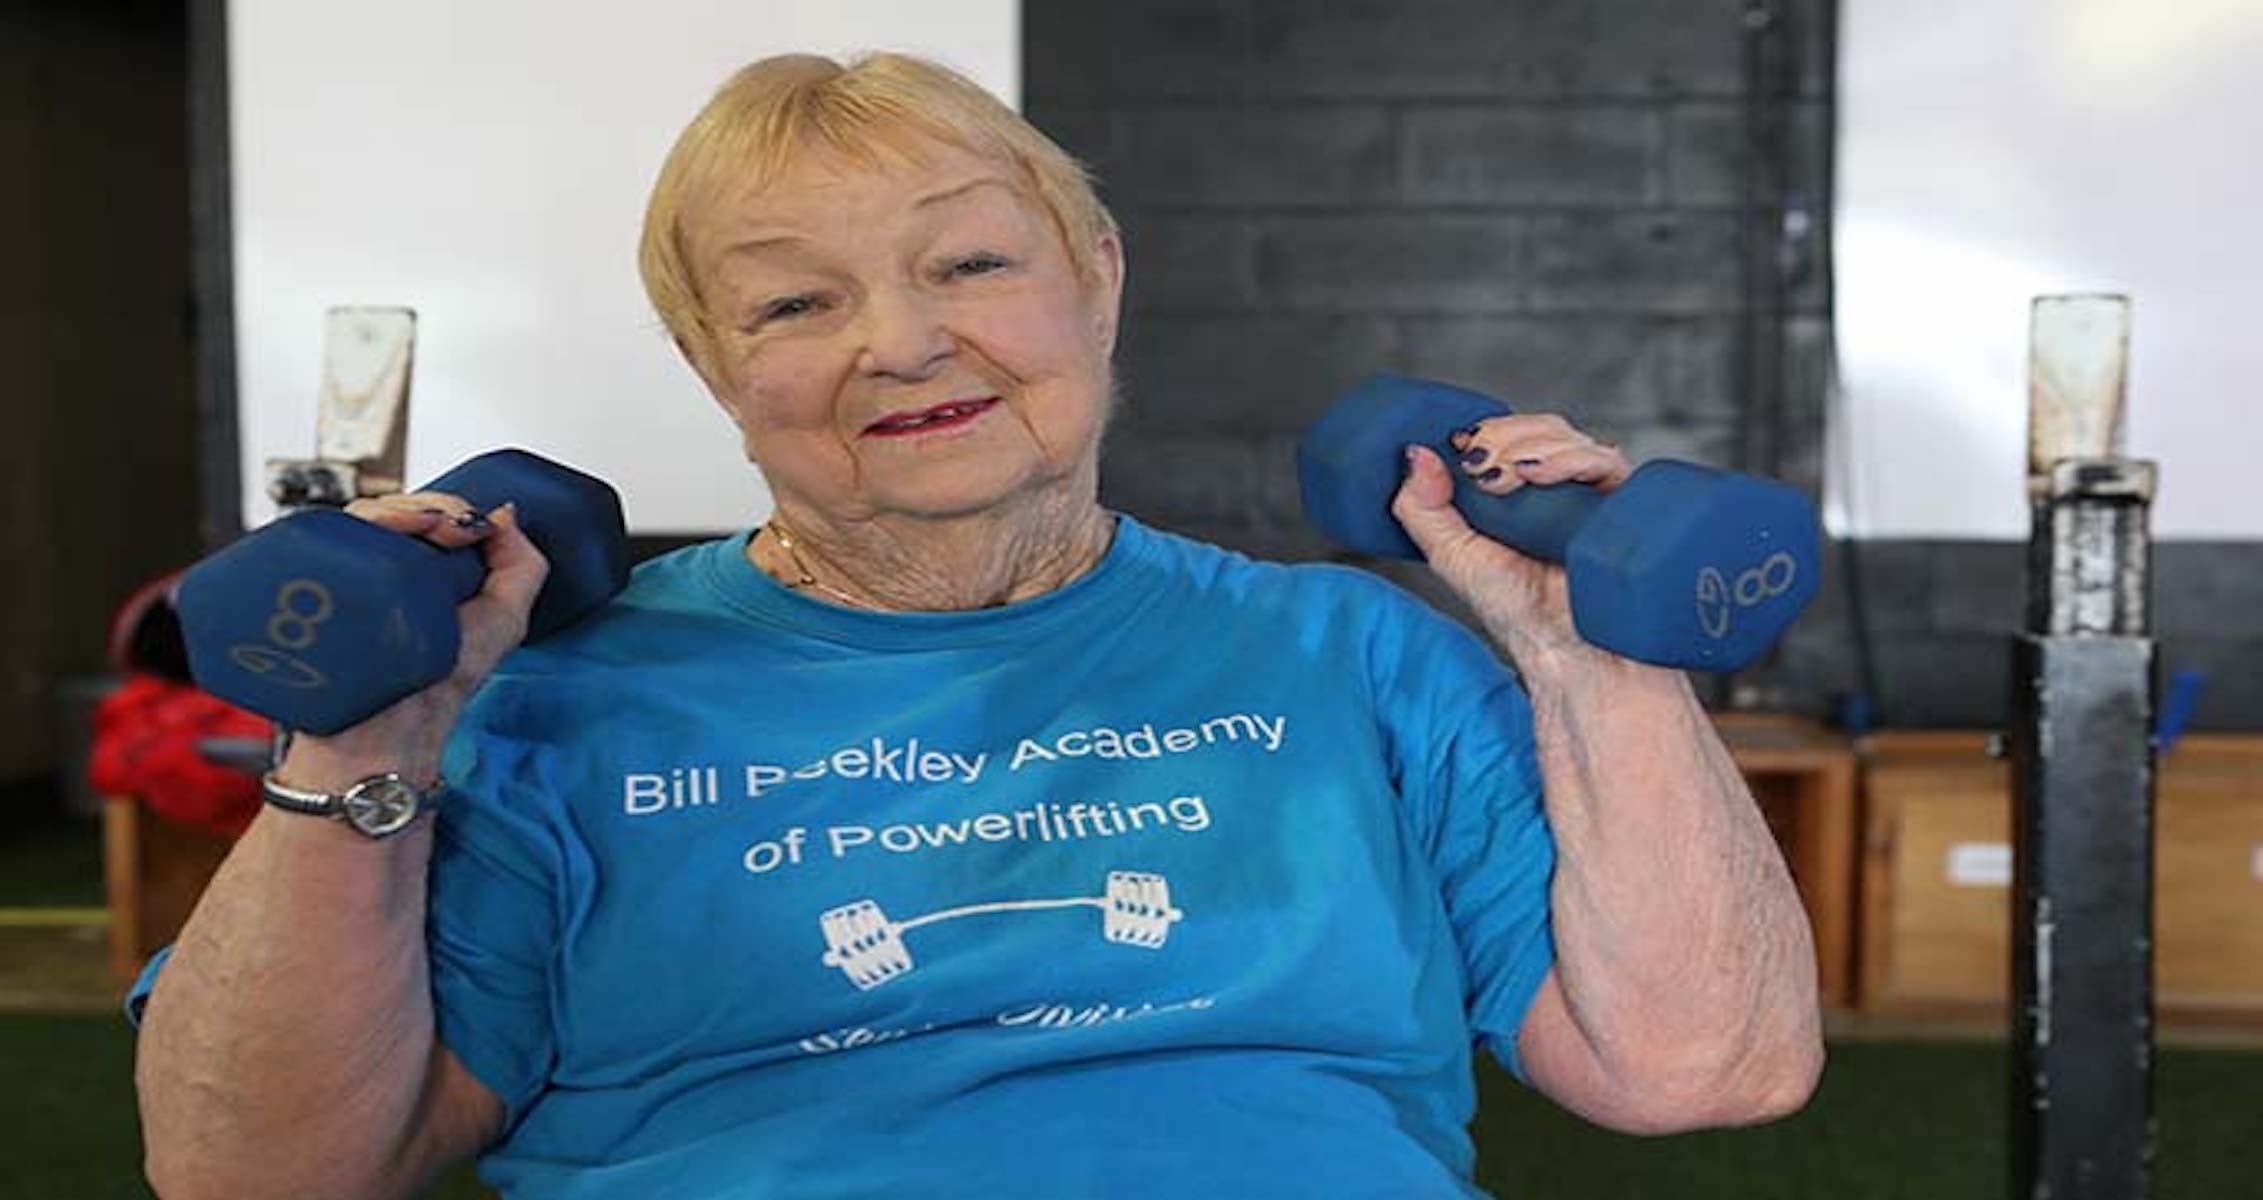 100-Year-Old Edith Murway-Traina Becomes Oldest Competitive Powerlifter